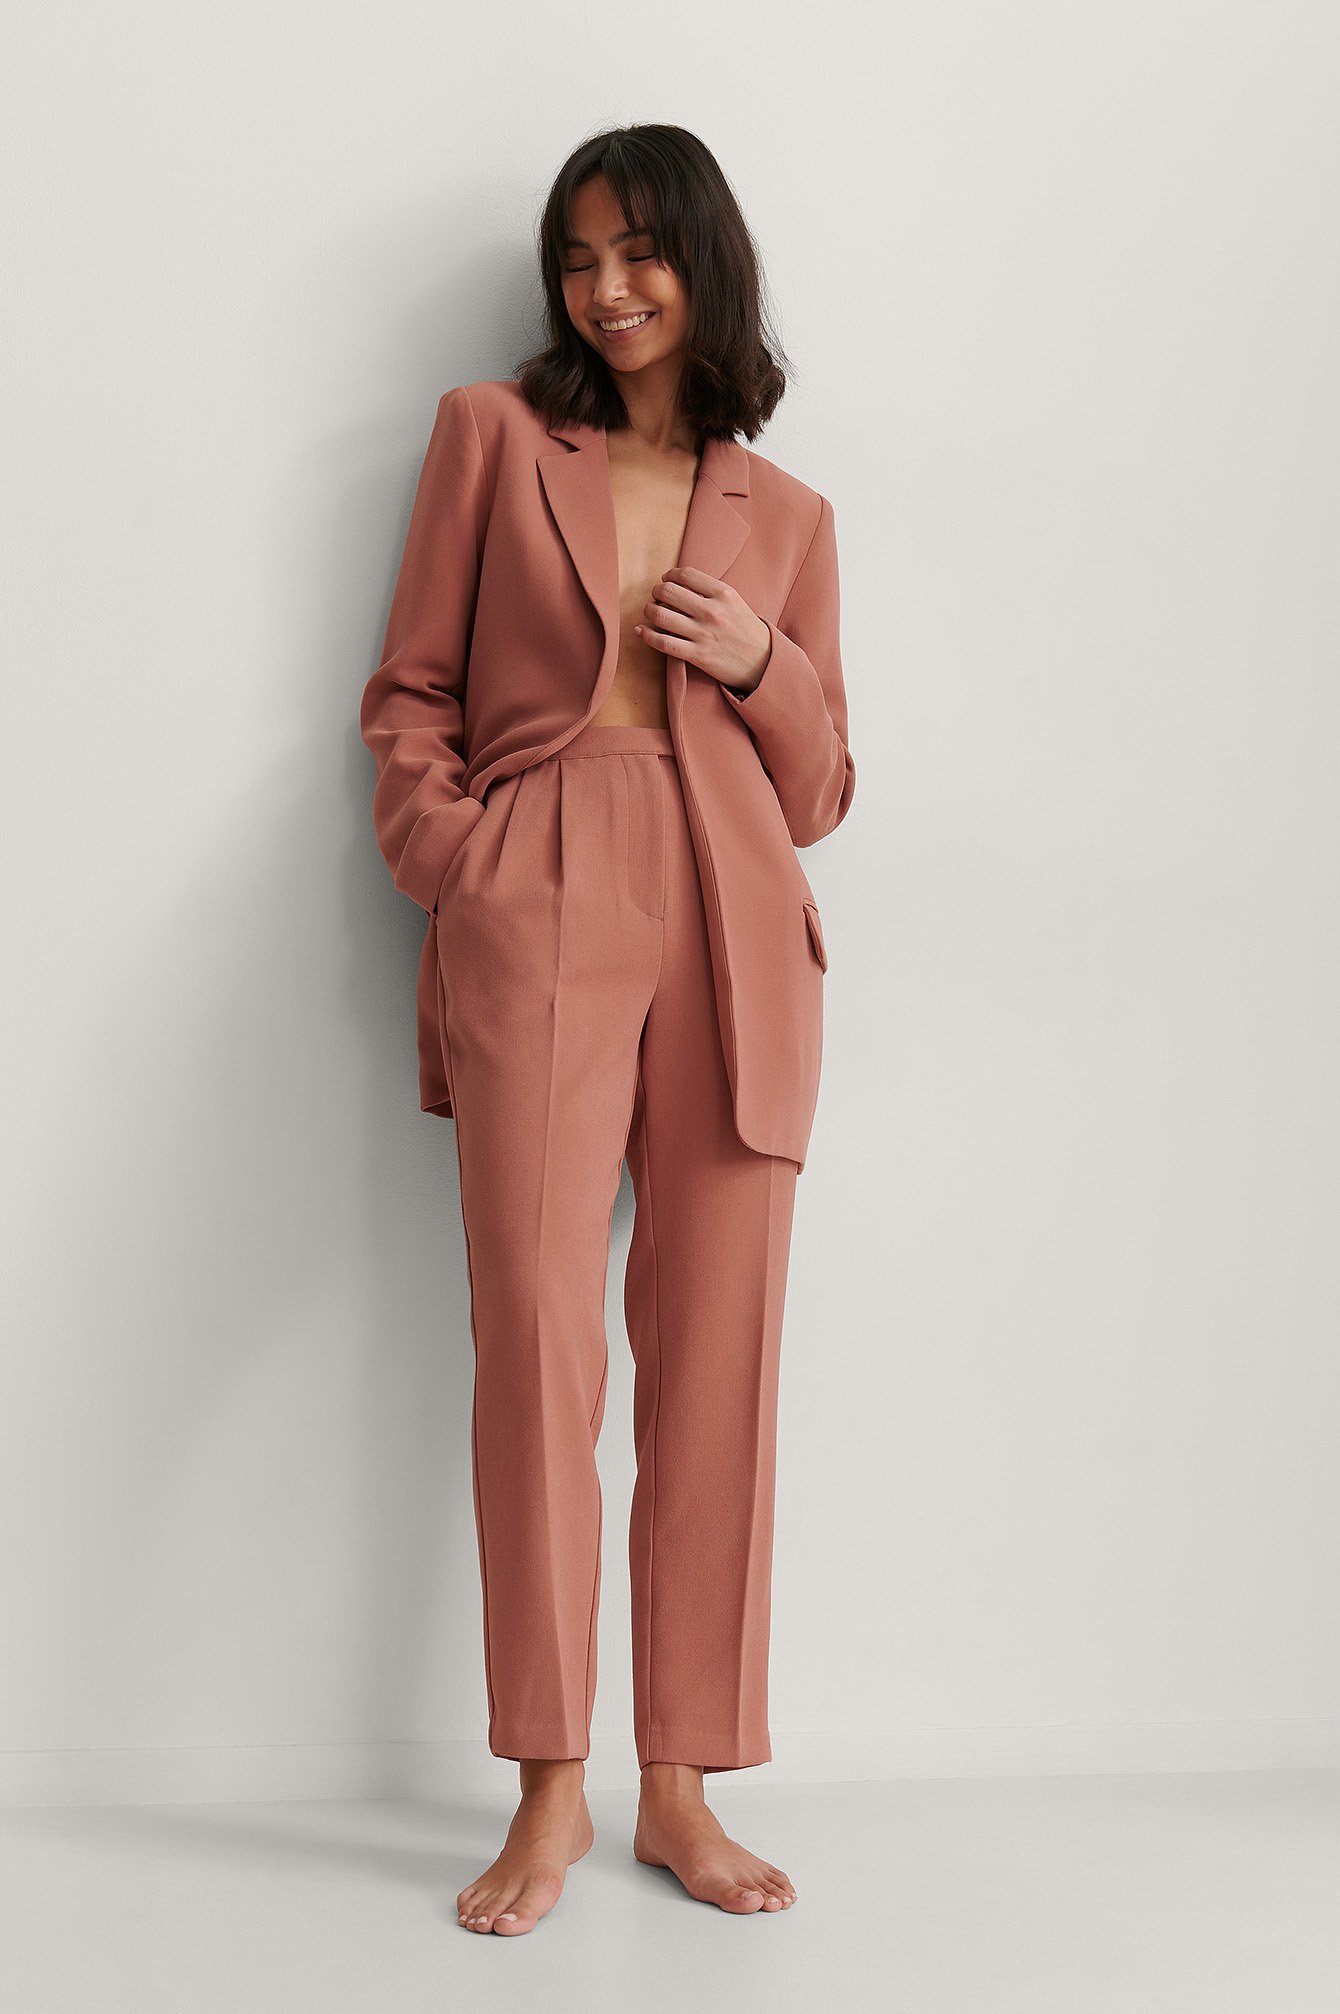 Cropped Darted Suit Pants and blazer Outfit